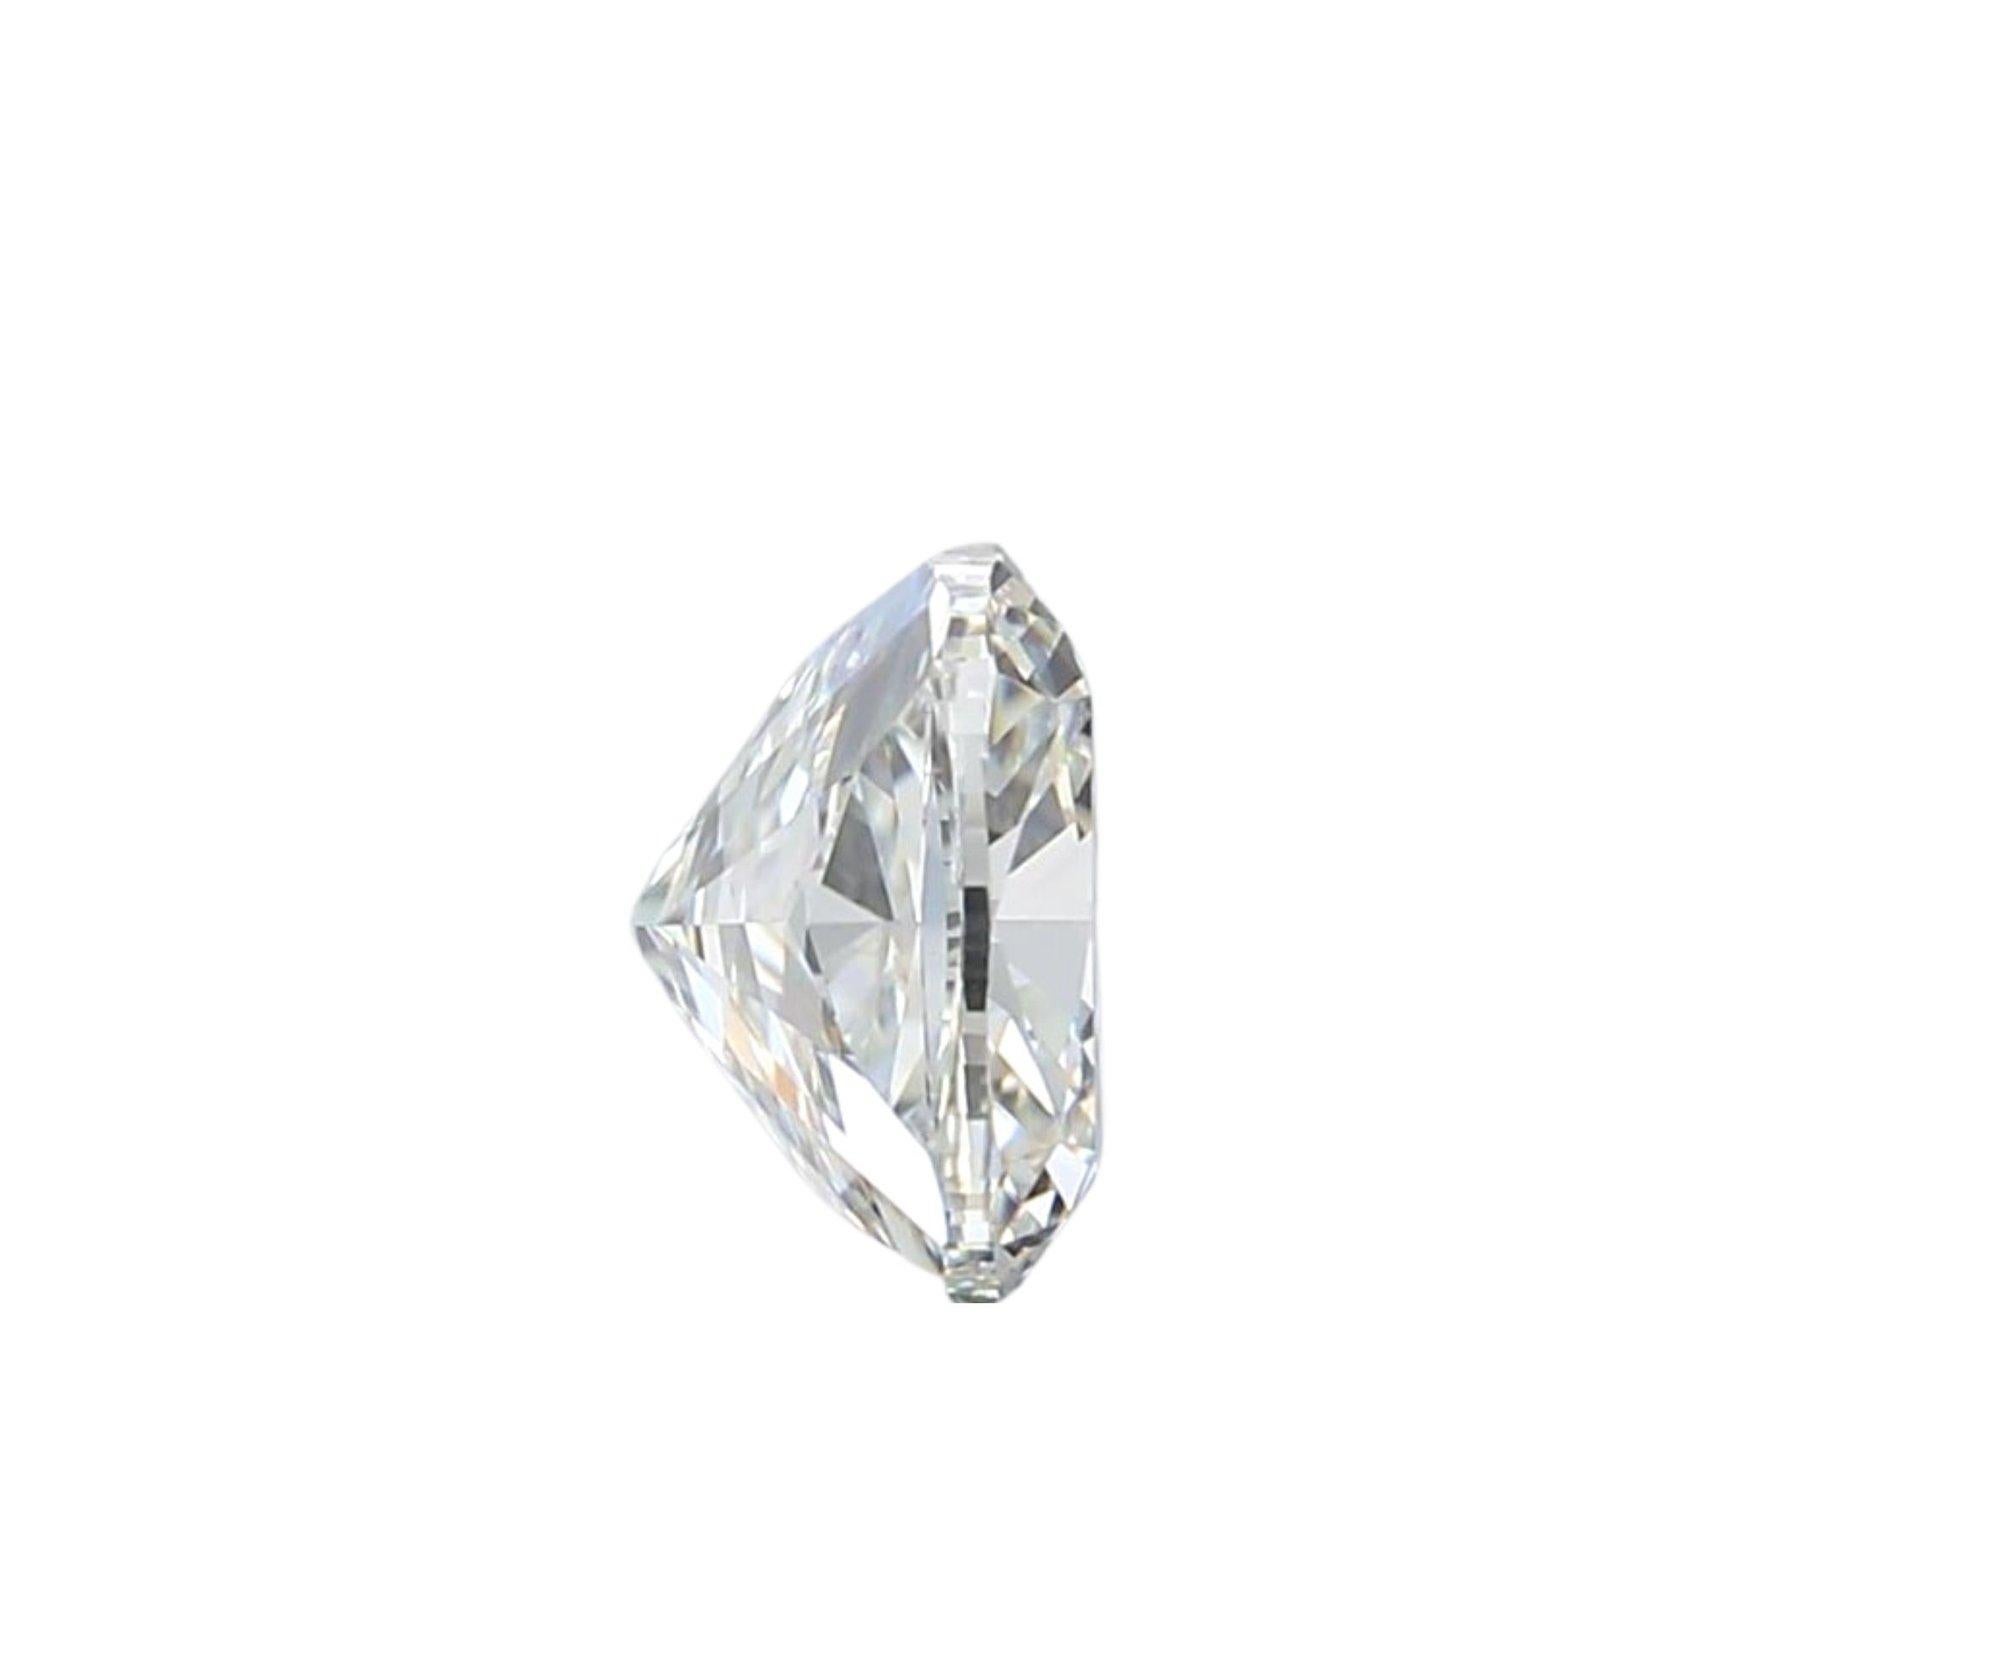 Women's or Men's Natural Cushion Diamond in a 1.01 Carat H IF- IGI Certificate For Sale